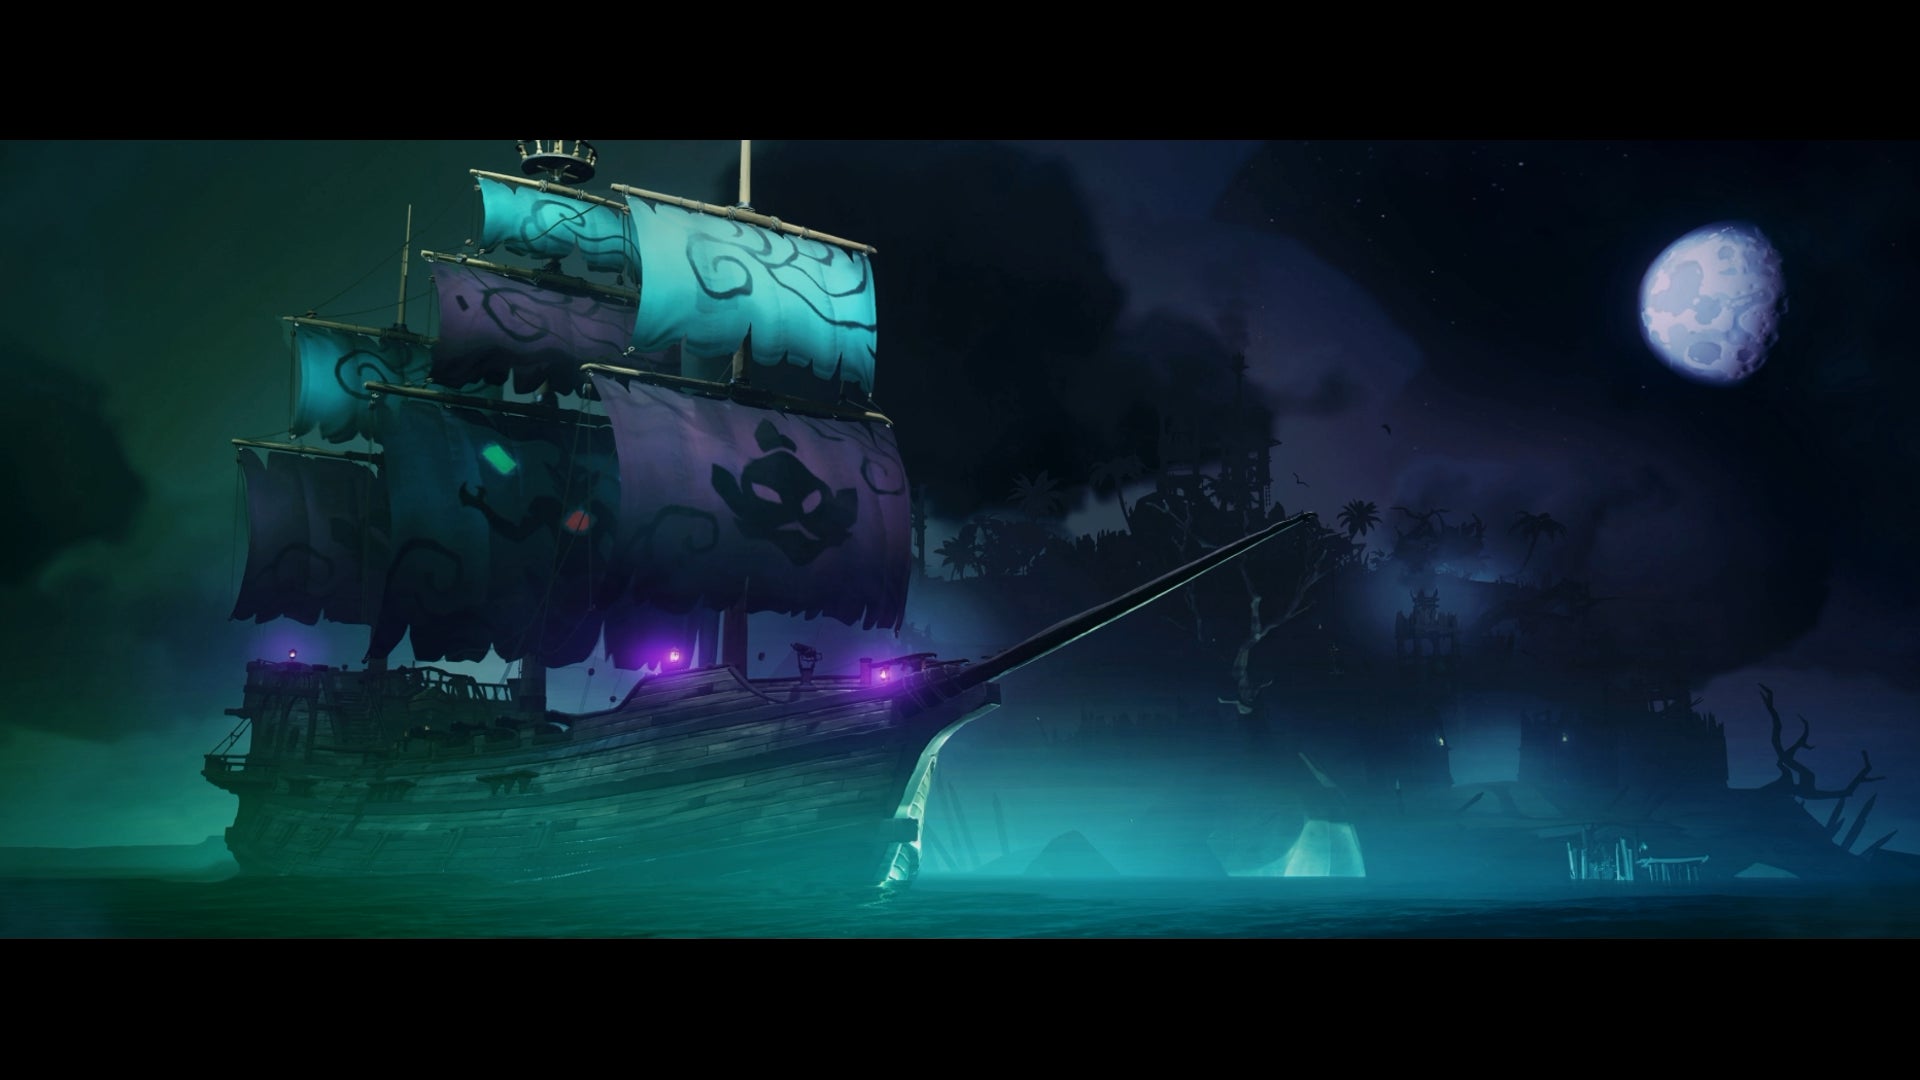 I made a sea of thieves live wallpaper x rseaofthieves